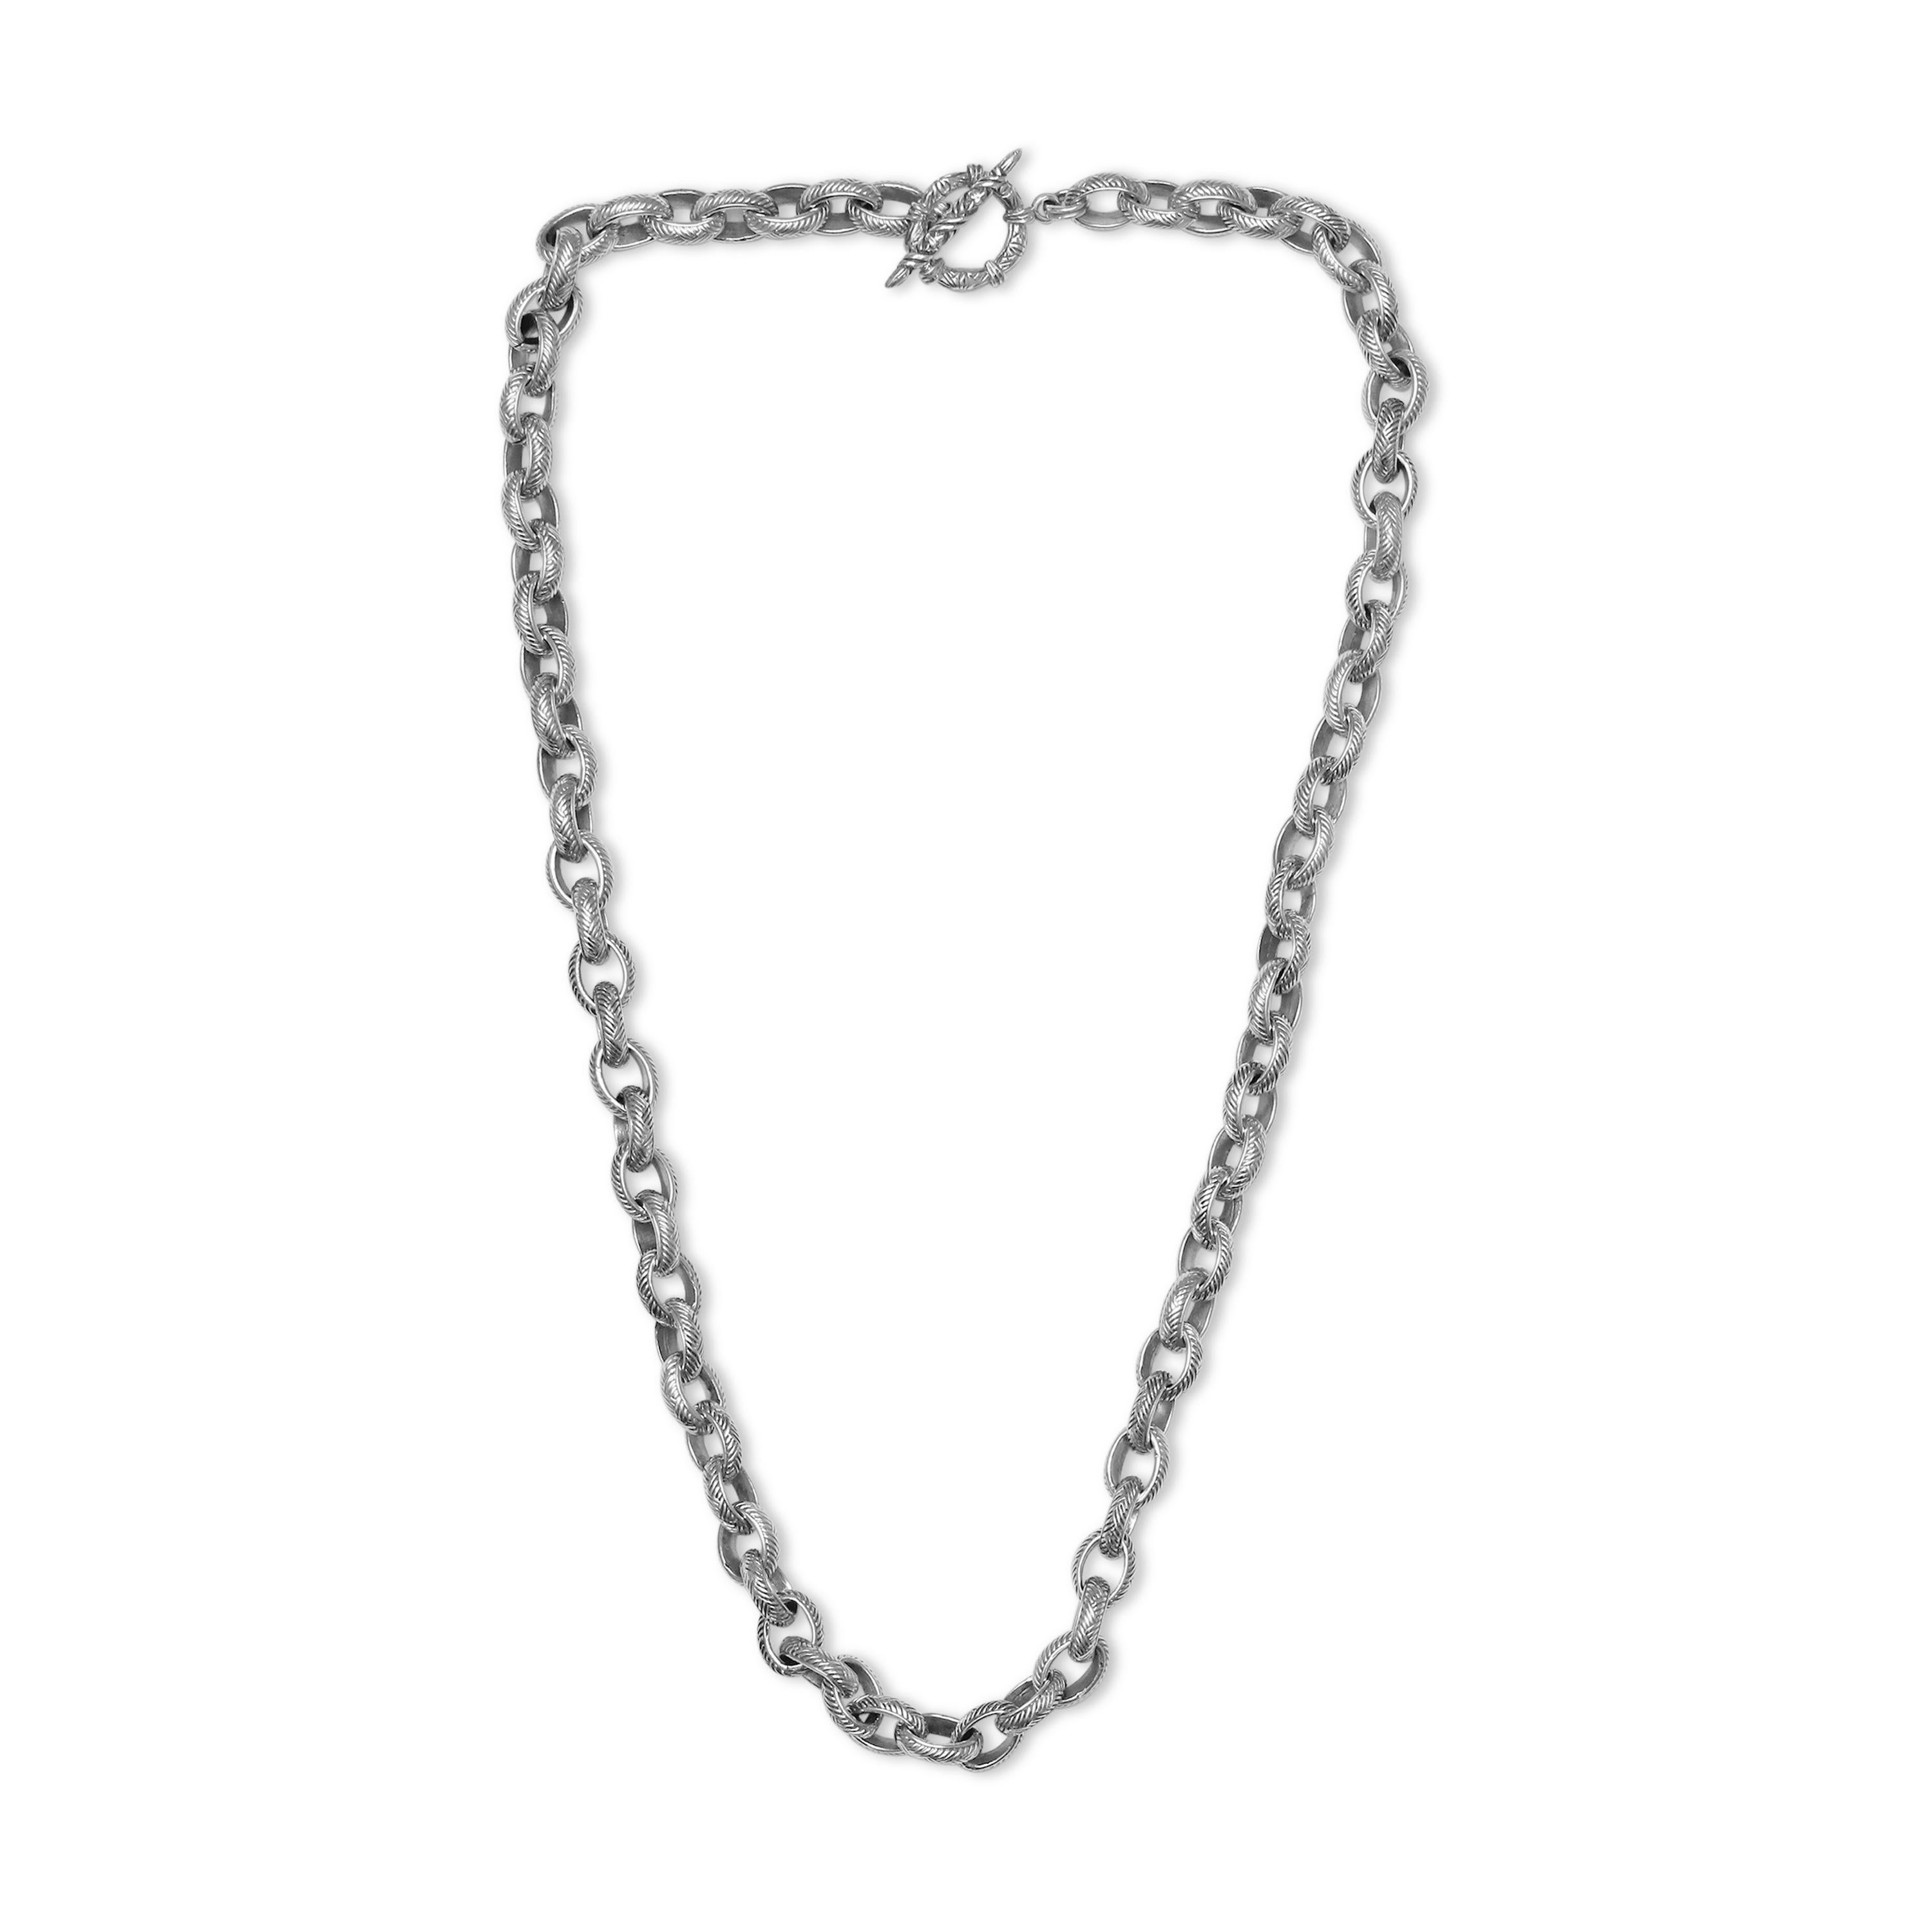 
Immerse yourself in the timeless allure of Stephen Dweck's Orogneto Collection with the Signature Engraved Weave Linked Sterling Silver Chain Necklace. Crafted with meticulous artistry in 925 sterling silver and measuring 18